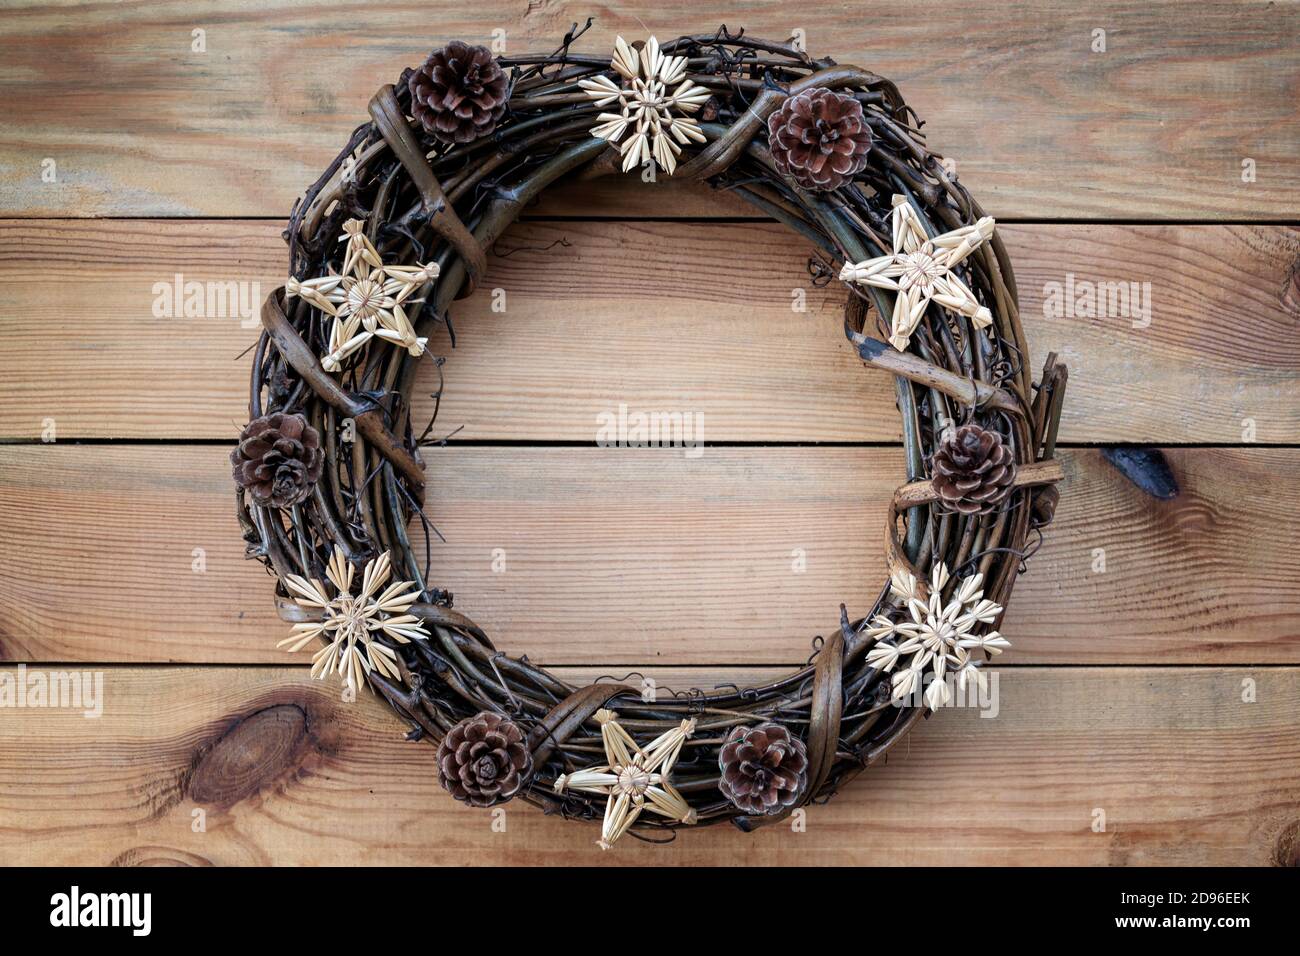 Rustic Christmas wreath on wooden planks background with copy space Stock Photo